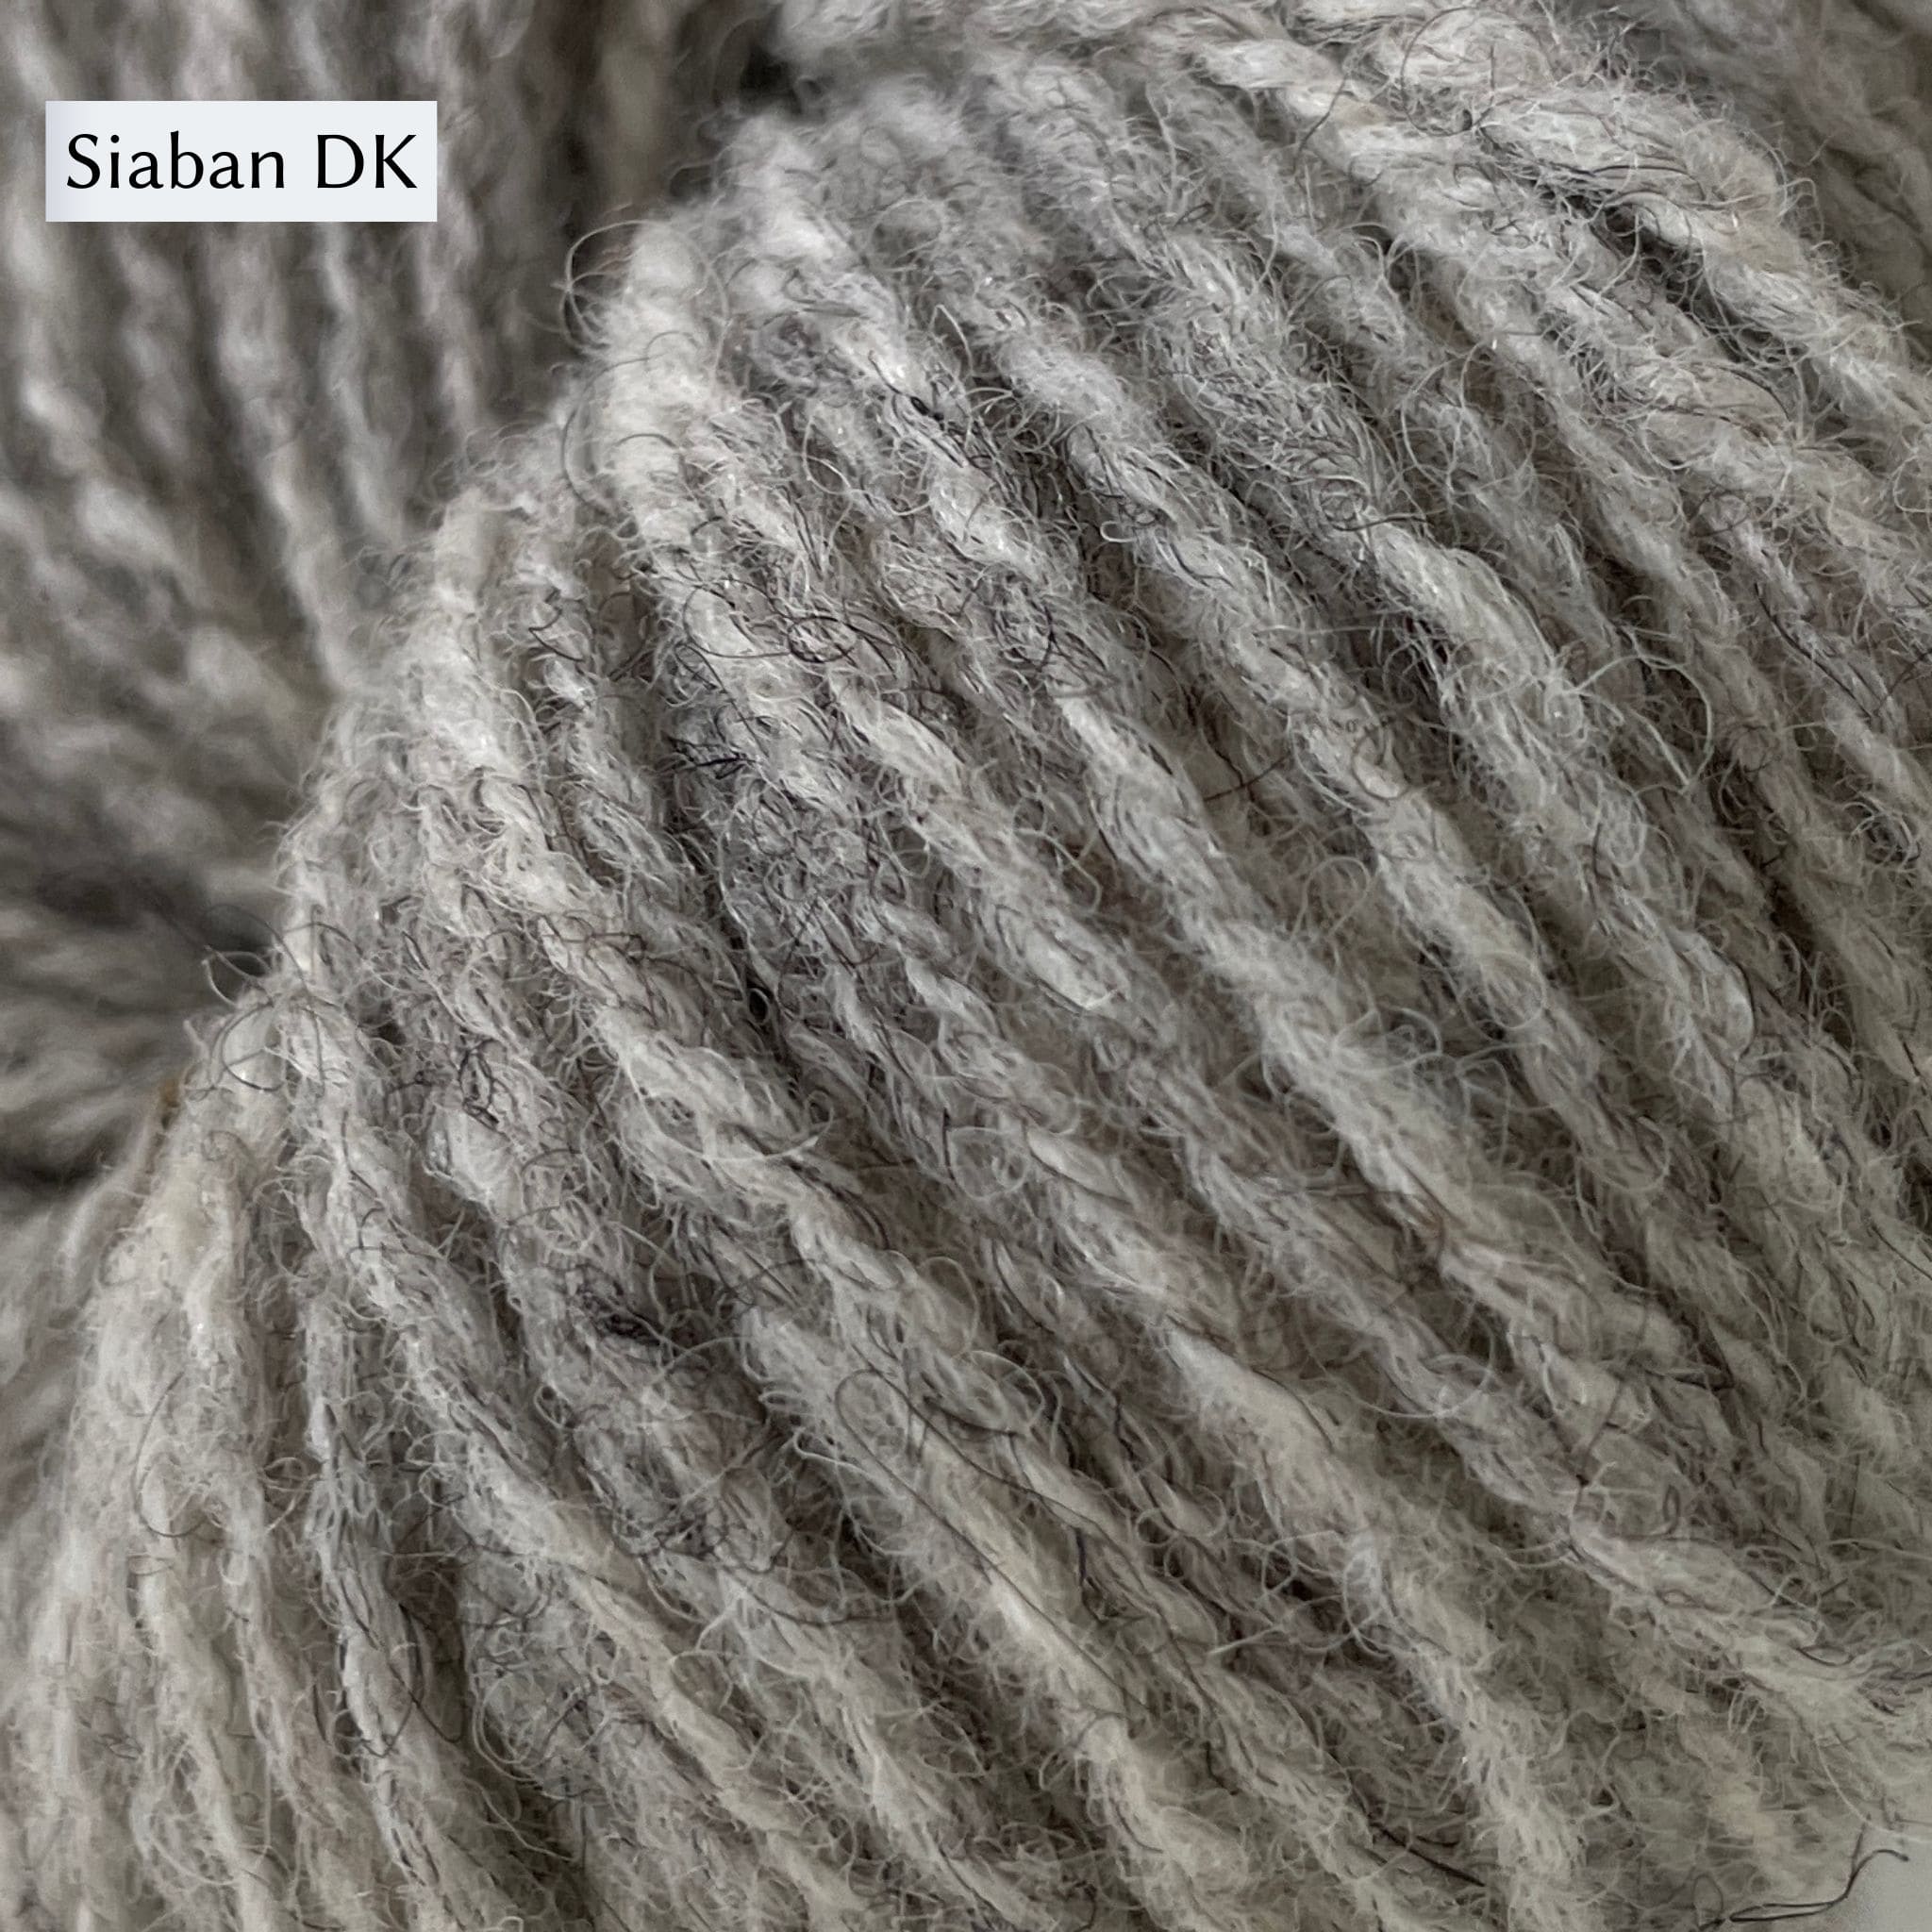 UIST Wool DK weight shown in Siaban color which is a natural light grey.